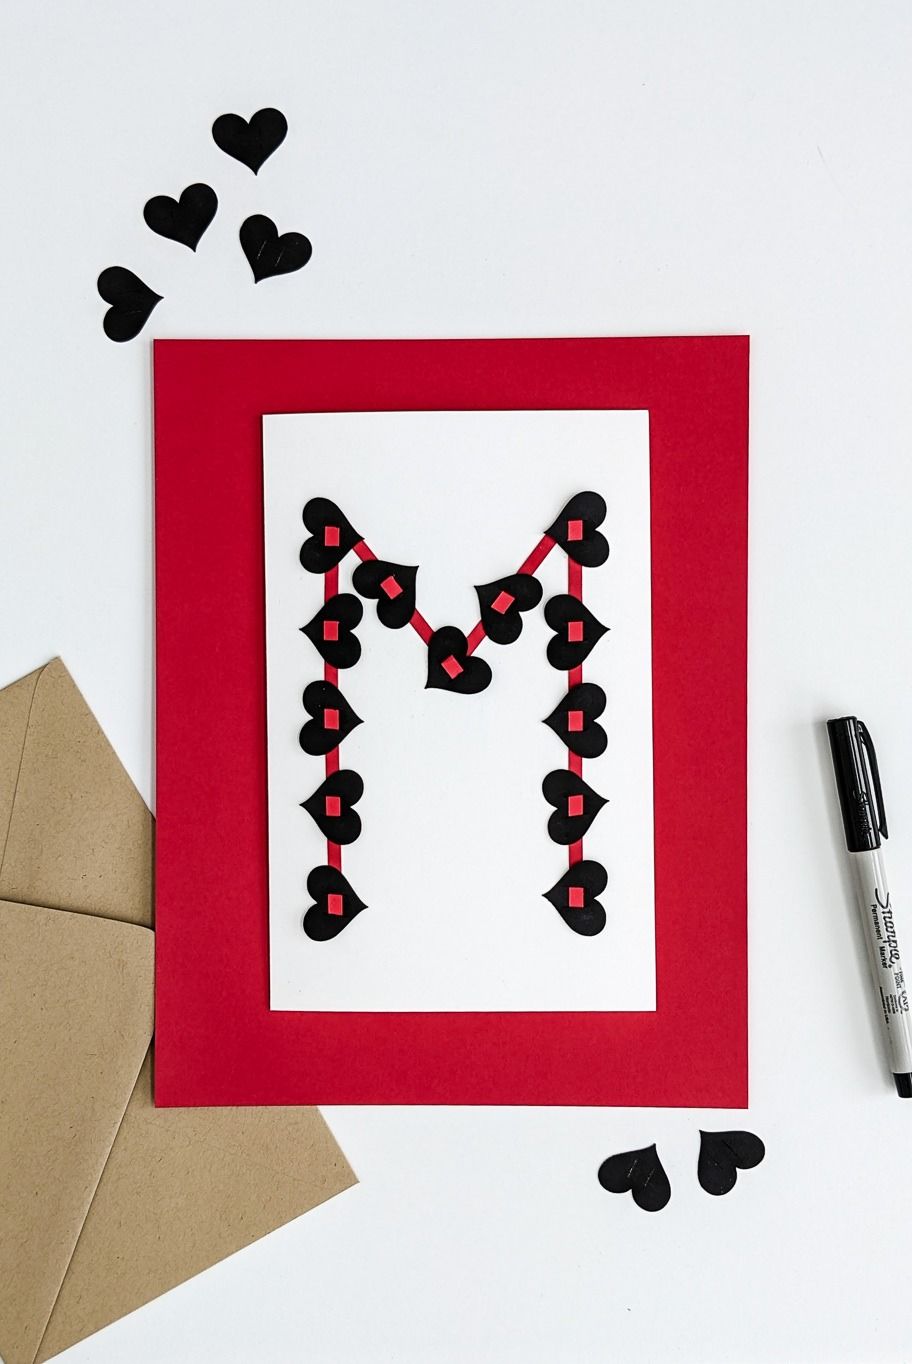 4 Ways to Make Cards for Valentine's Day - wikiHow